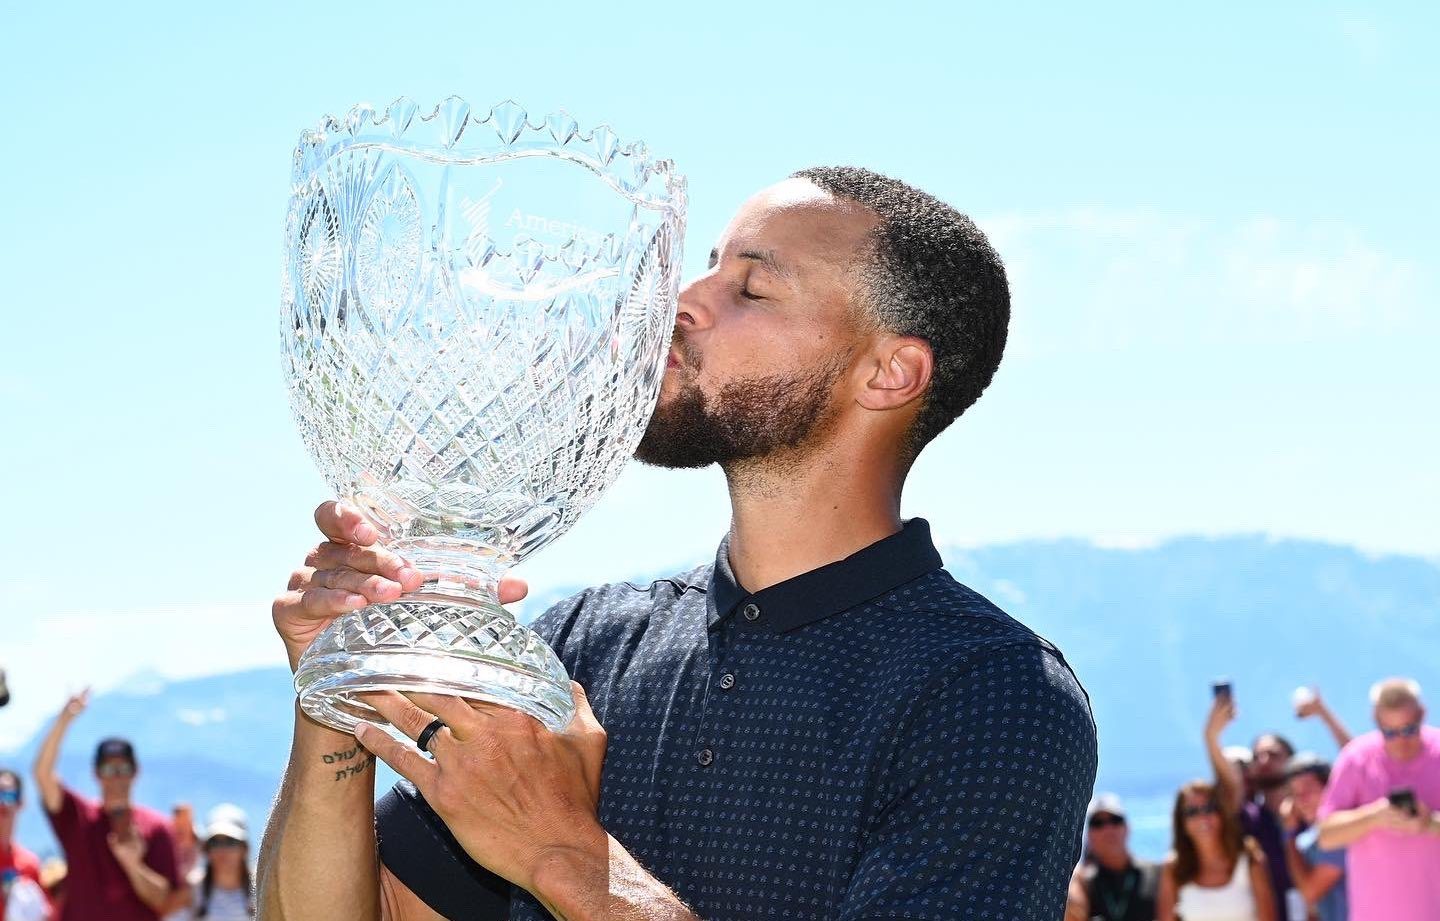 Warriors’ Steph Curry wins celebrity tournament after sinking hole-in-one